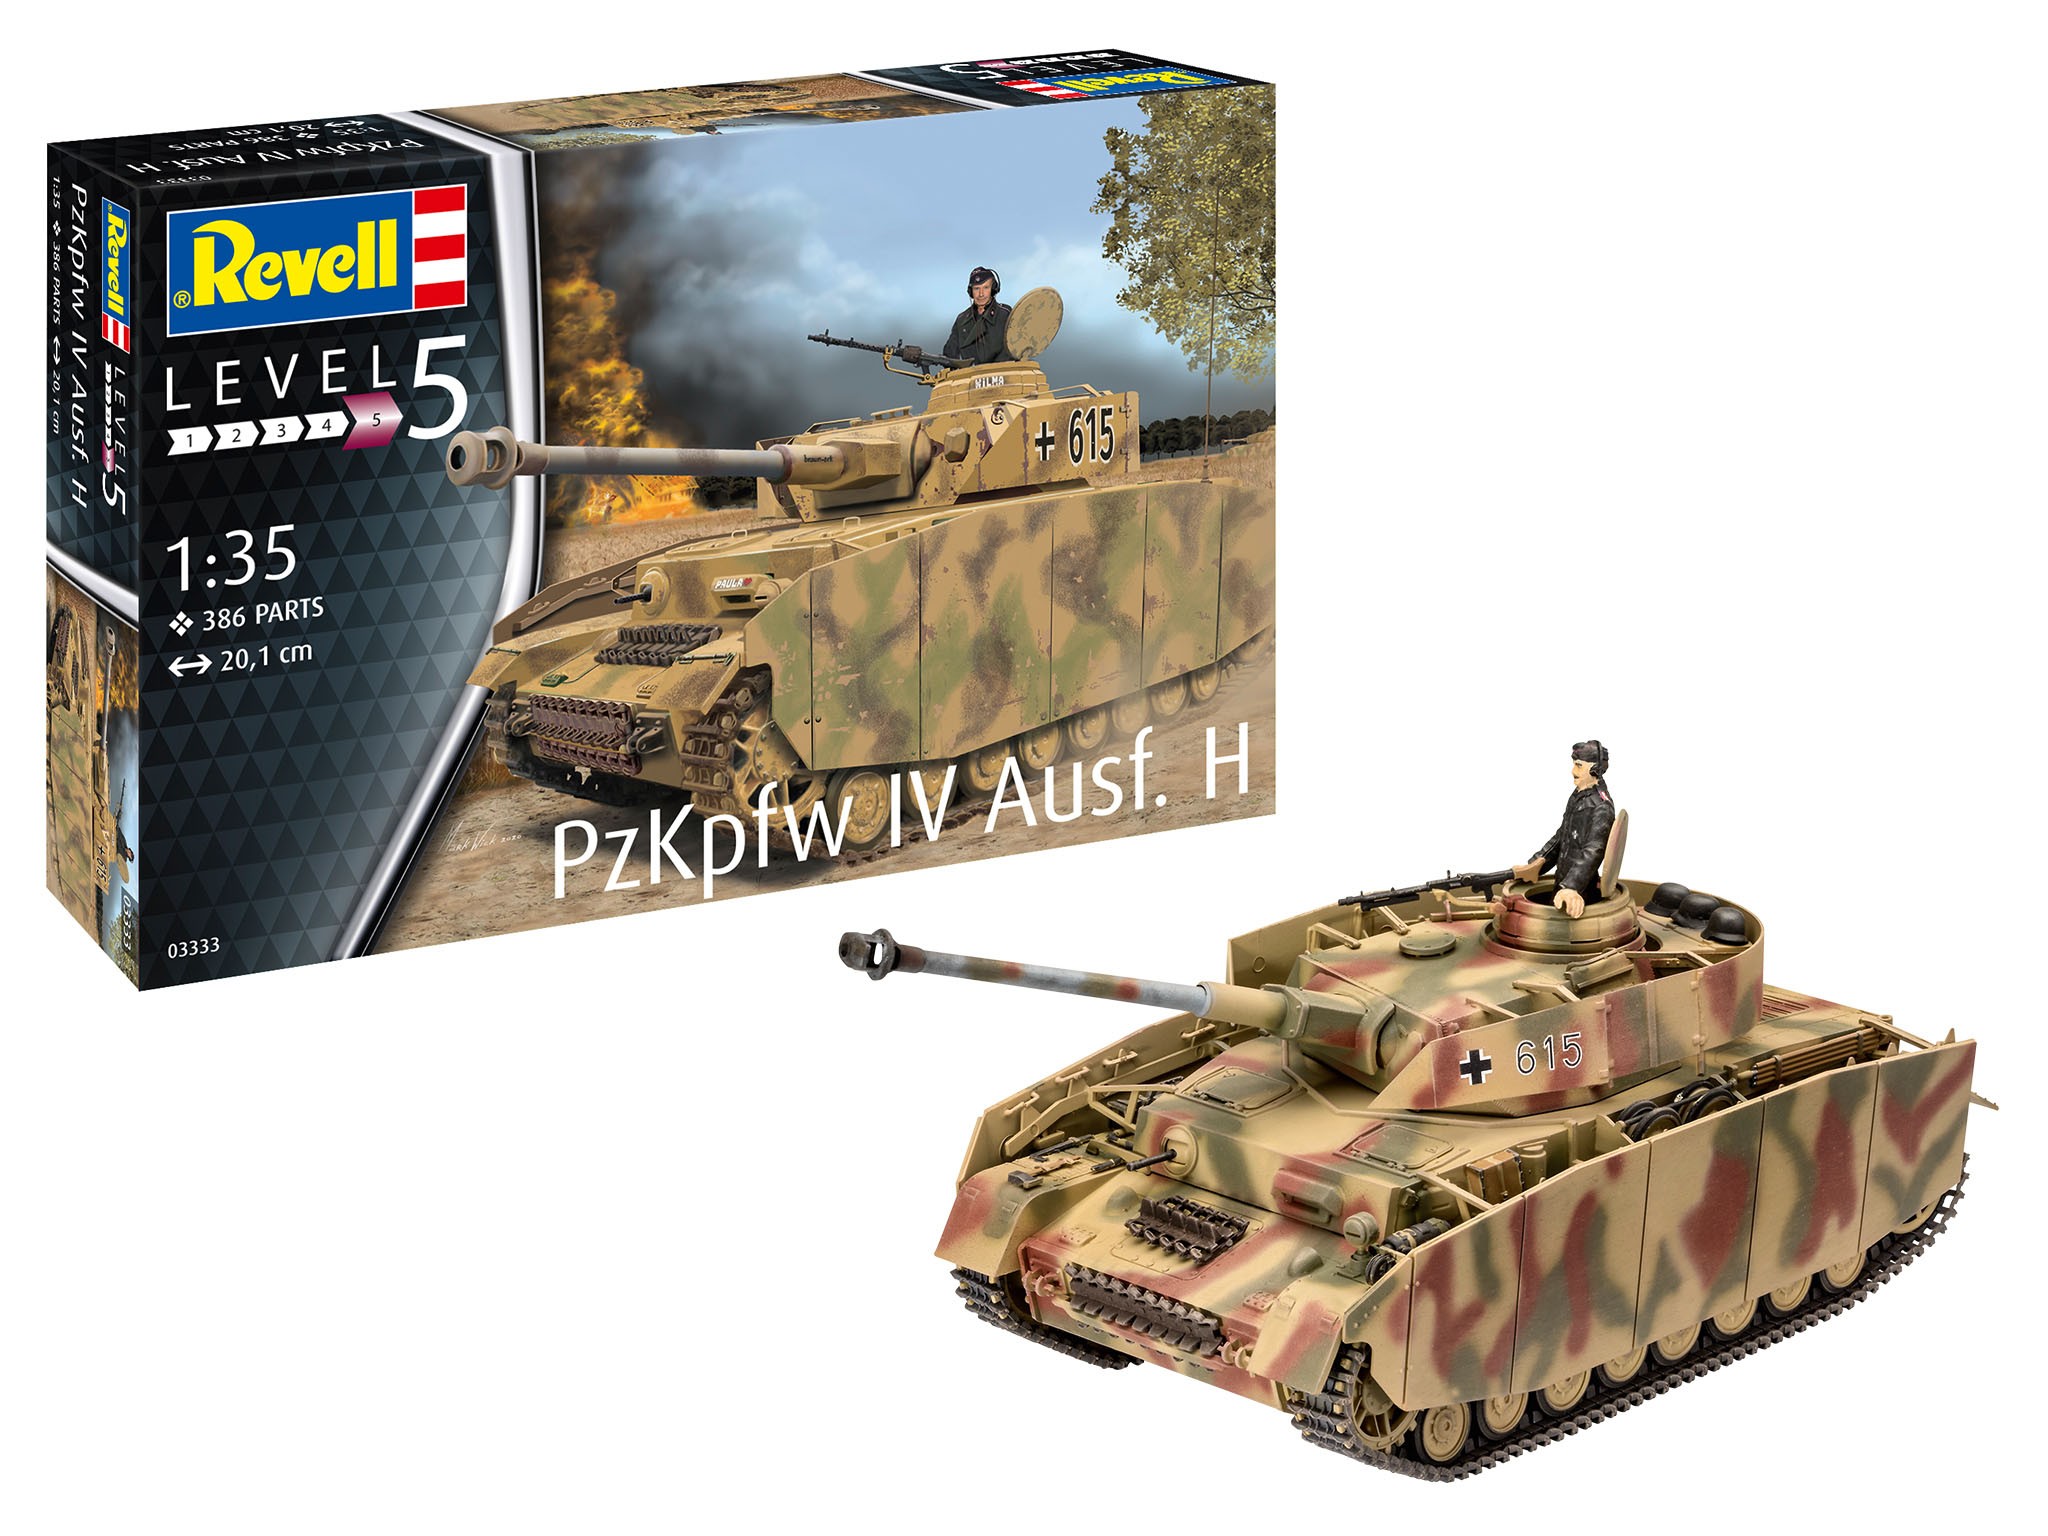 Revell 03333 Panzer IV Ausf. H  1:35